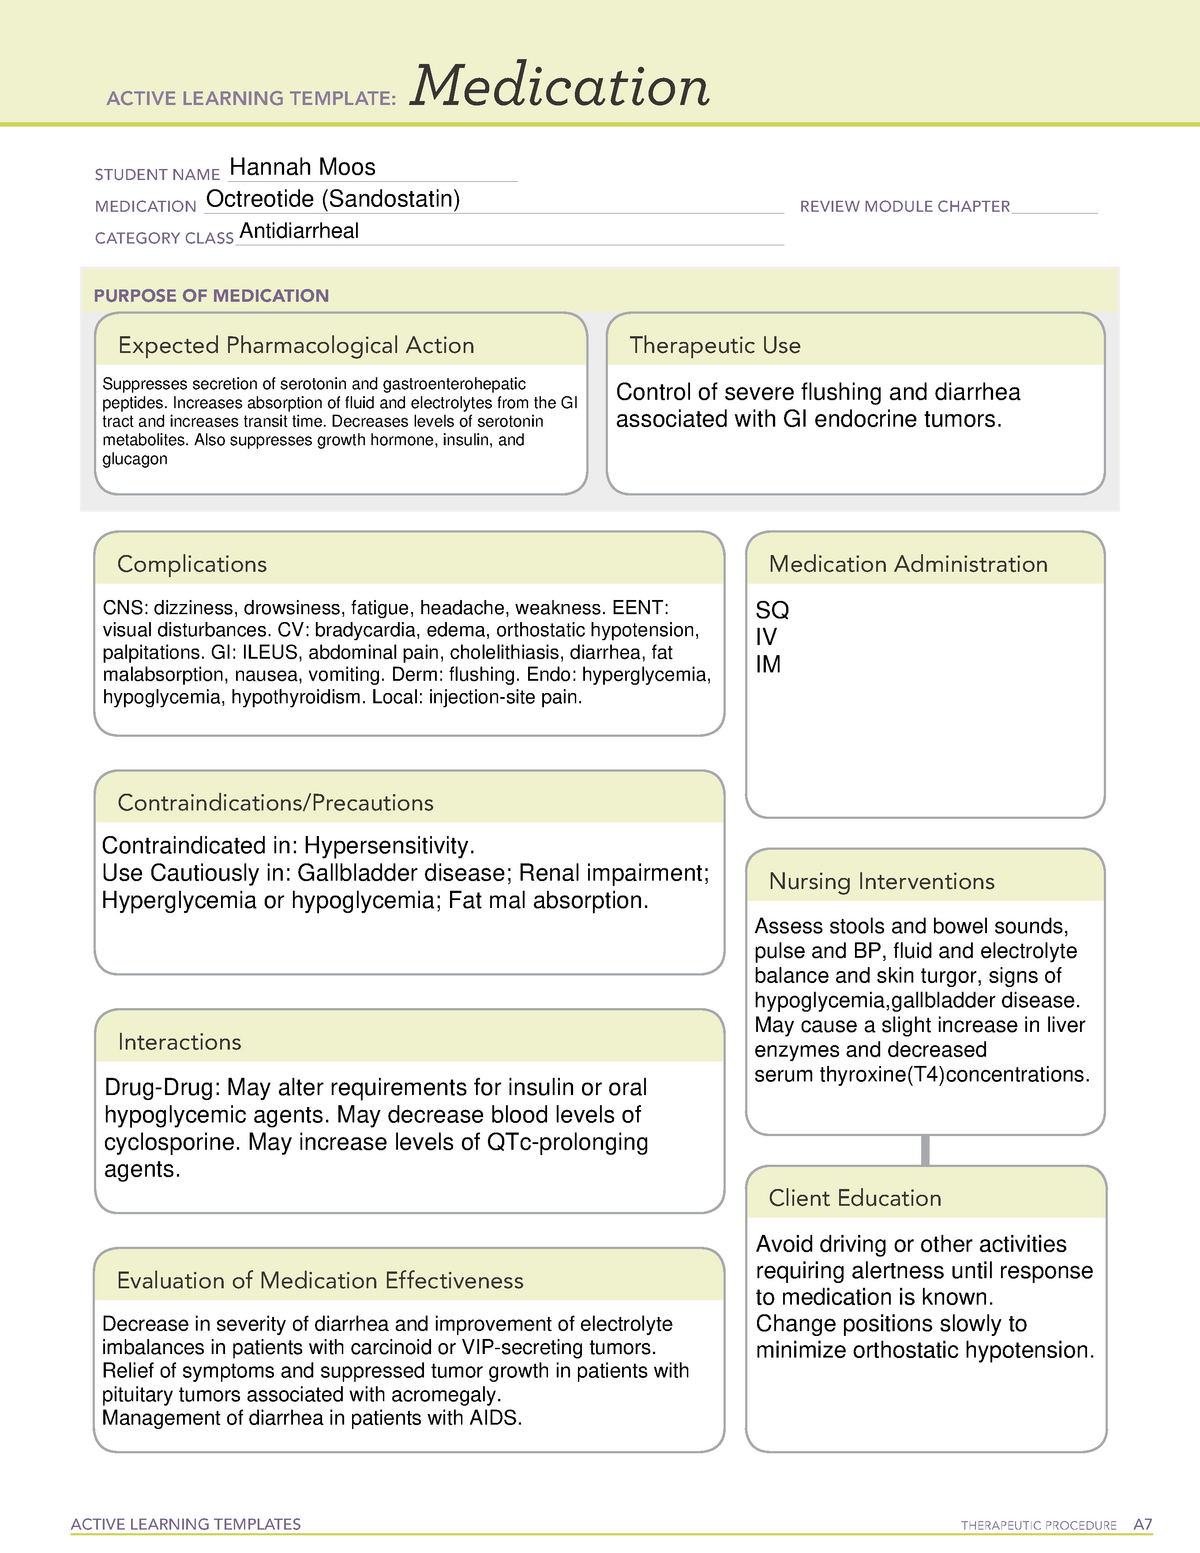 ati-med-card-octreotide-hm-active-learning-templates-therapeutic